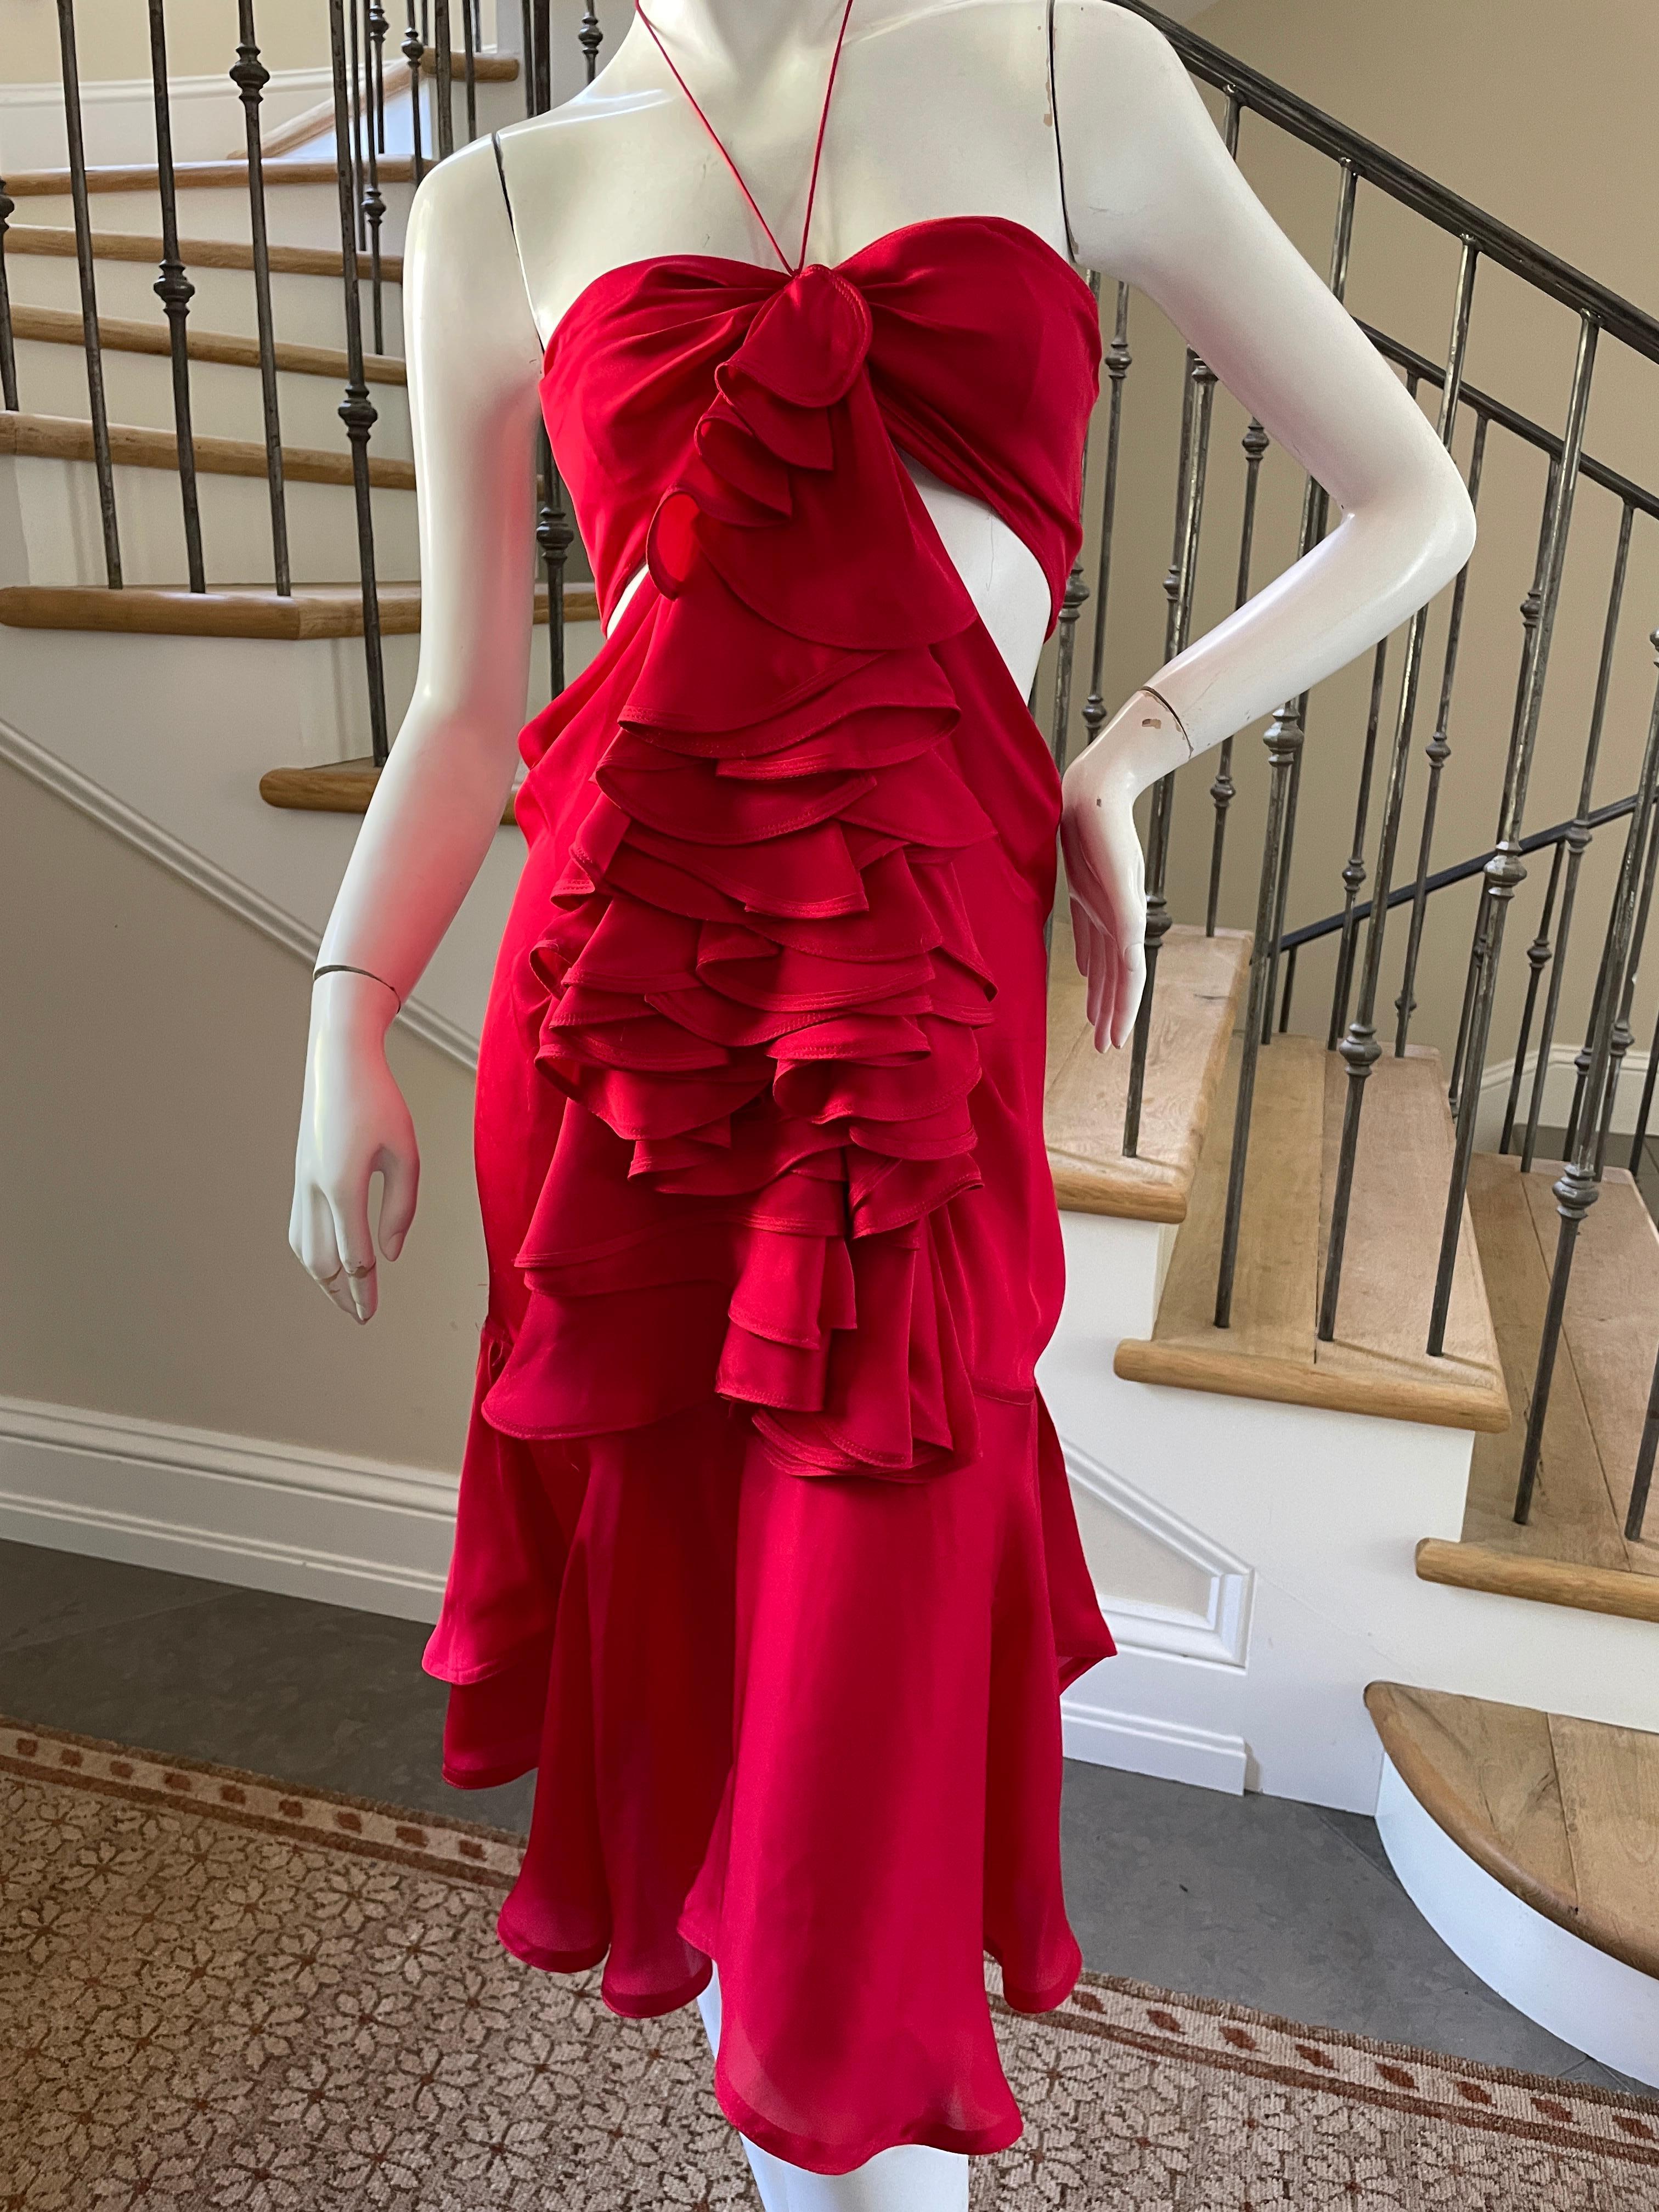 Yves Saint Laurent by Tom Ford 2003 Ruffled Red Silk Dress  For Sale 7